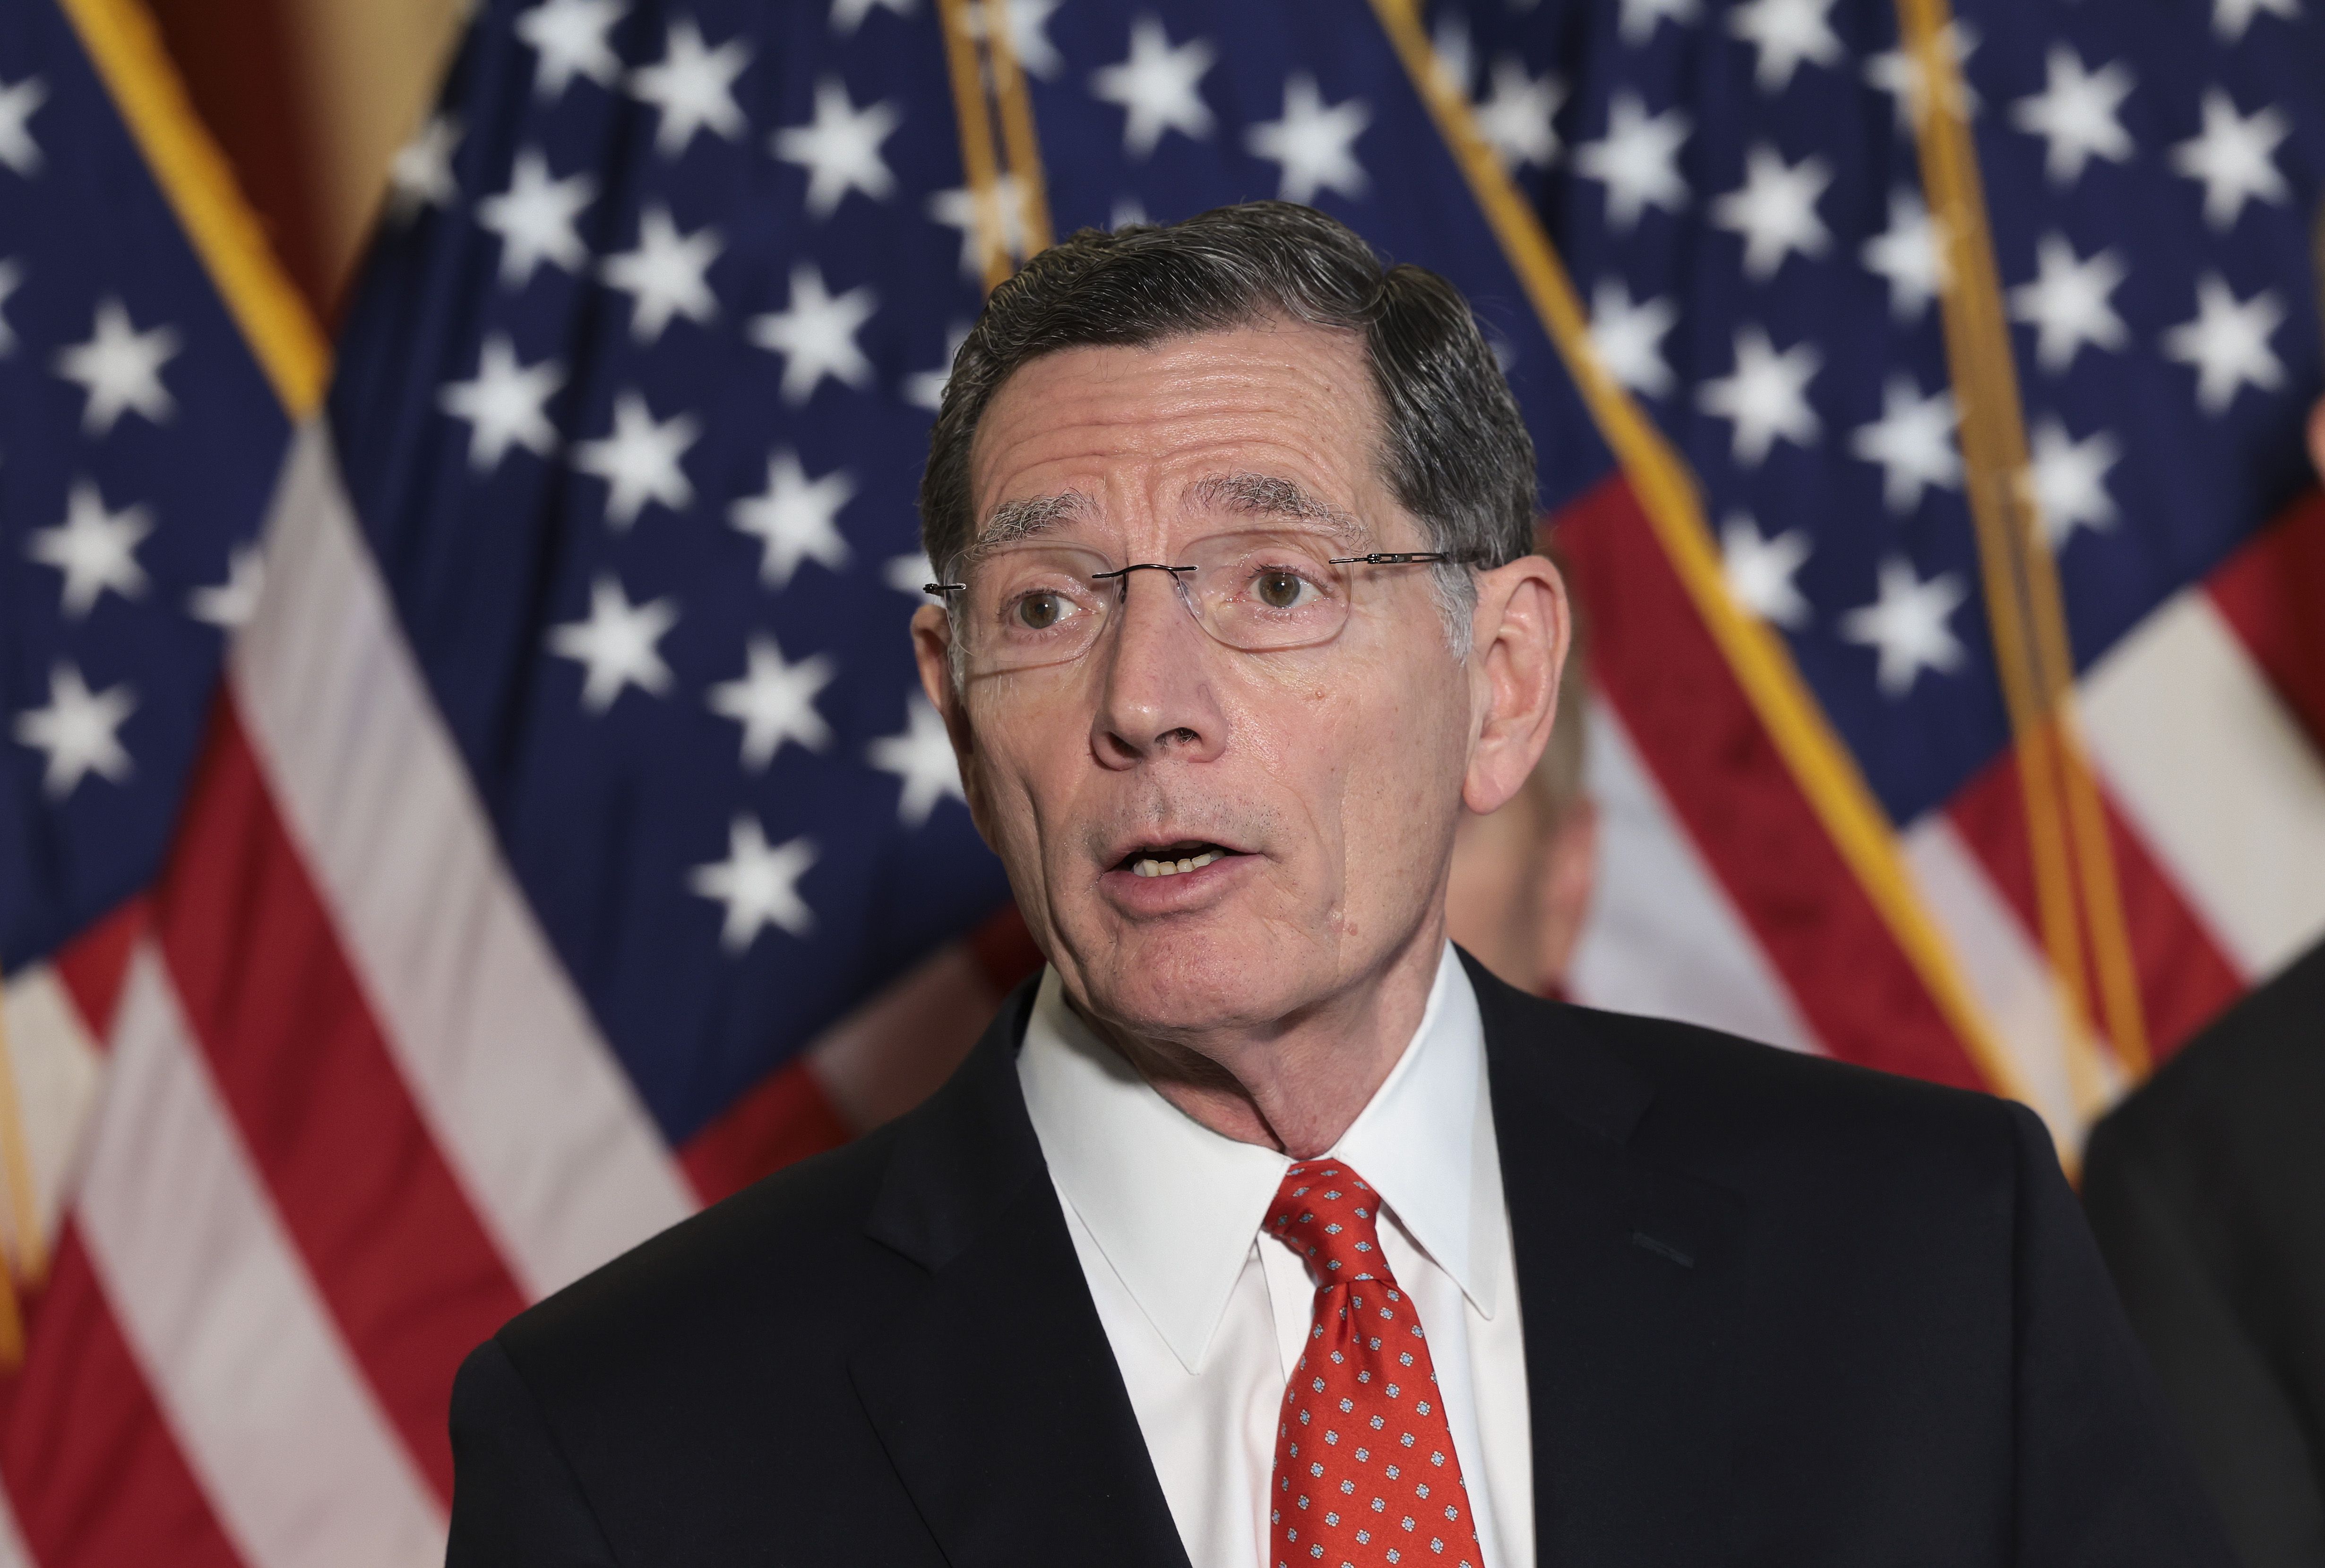 U.S. Sen. John Barrasso (R-WY) speaks on southern border security during a press conference at the Russell Senate Office Building on February 02, 2022 in Washington, DC.